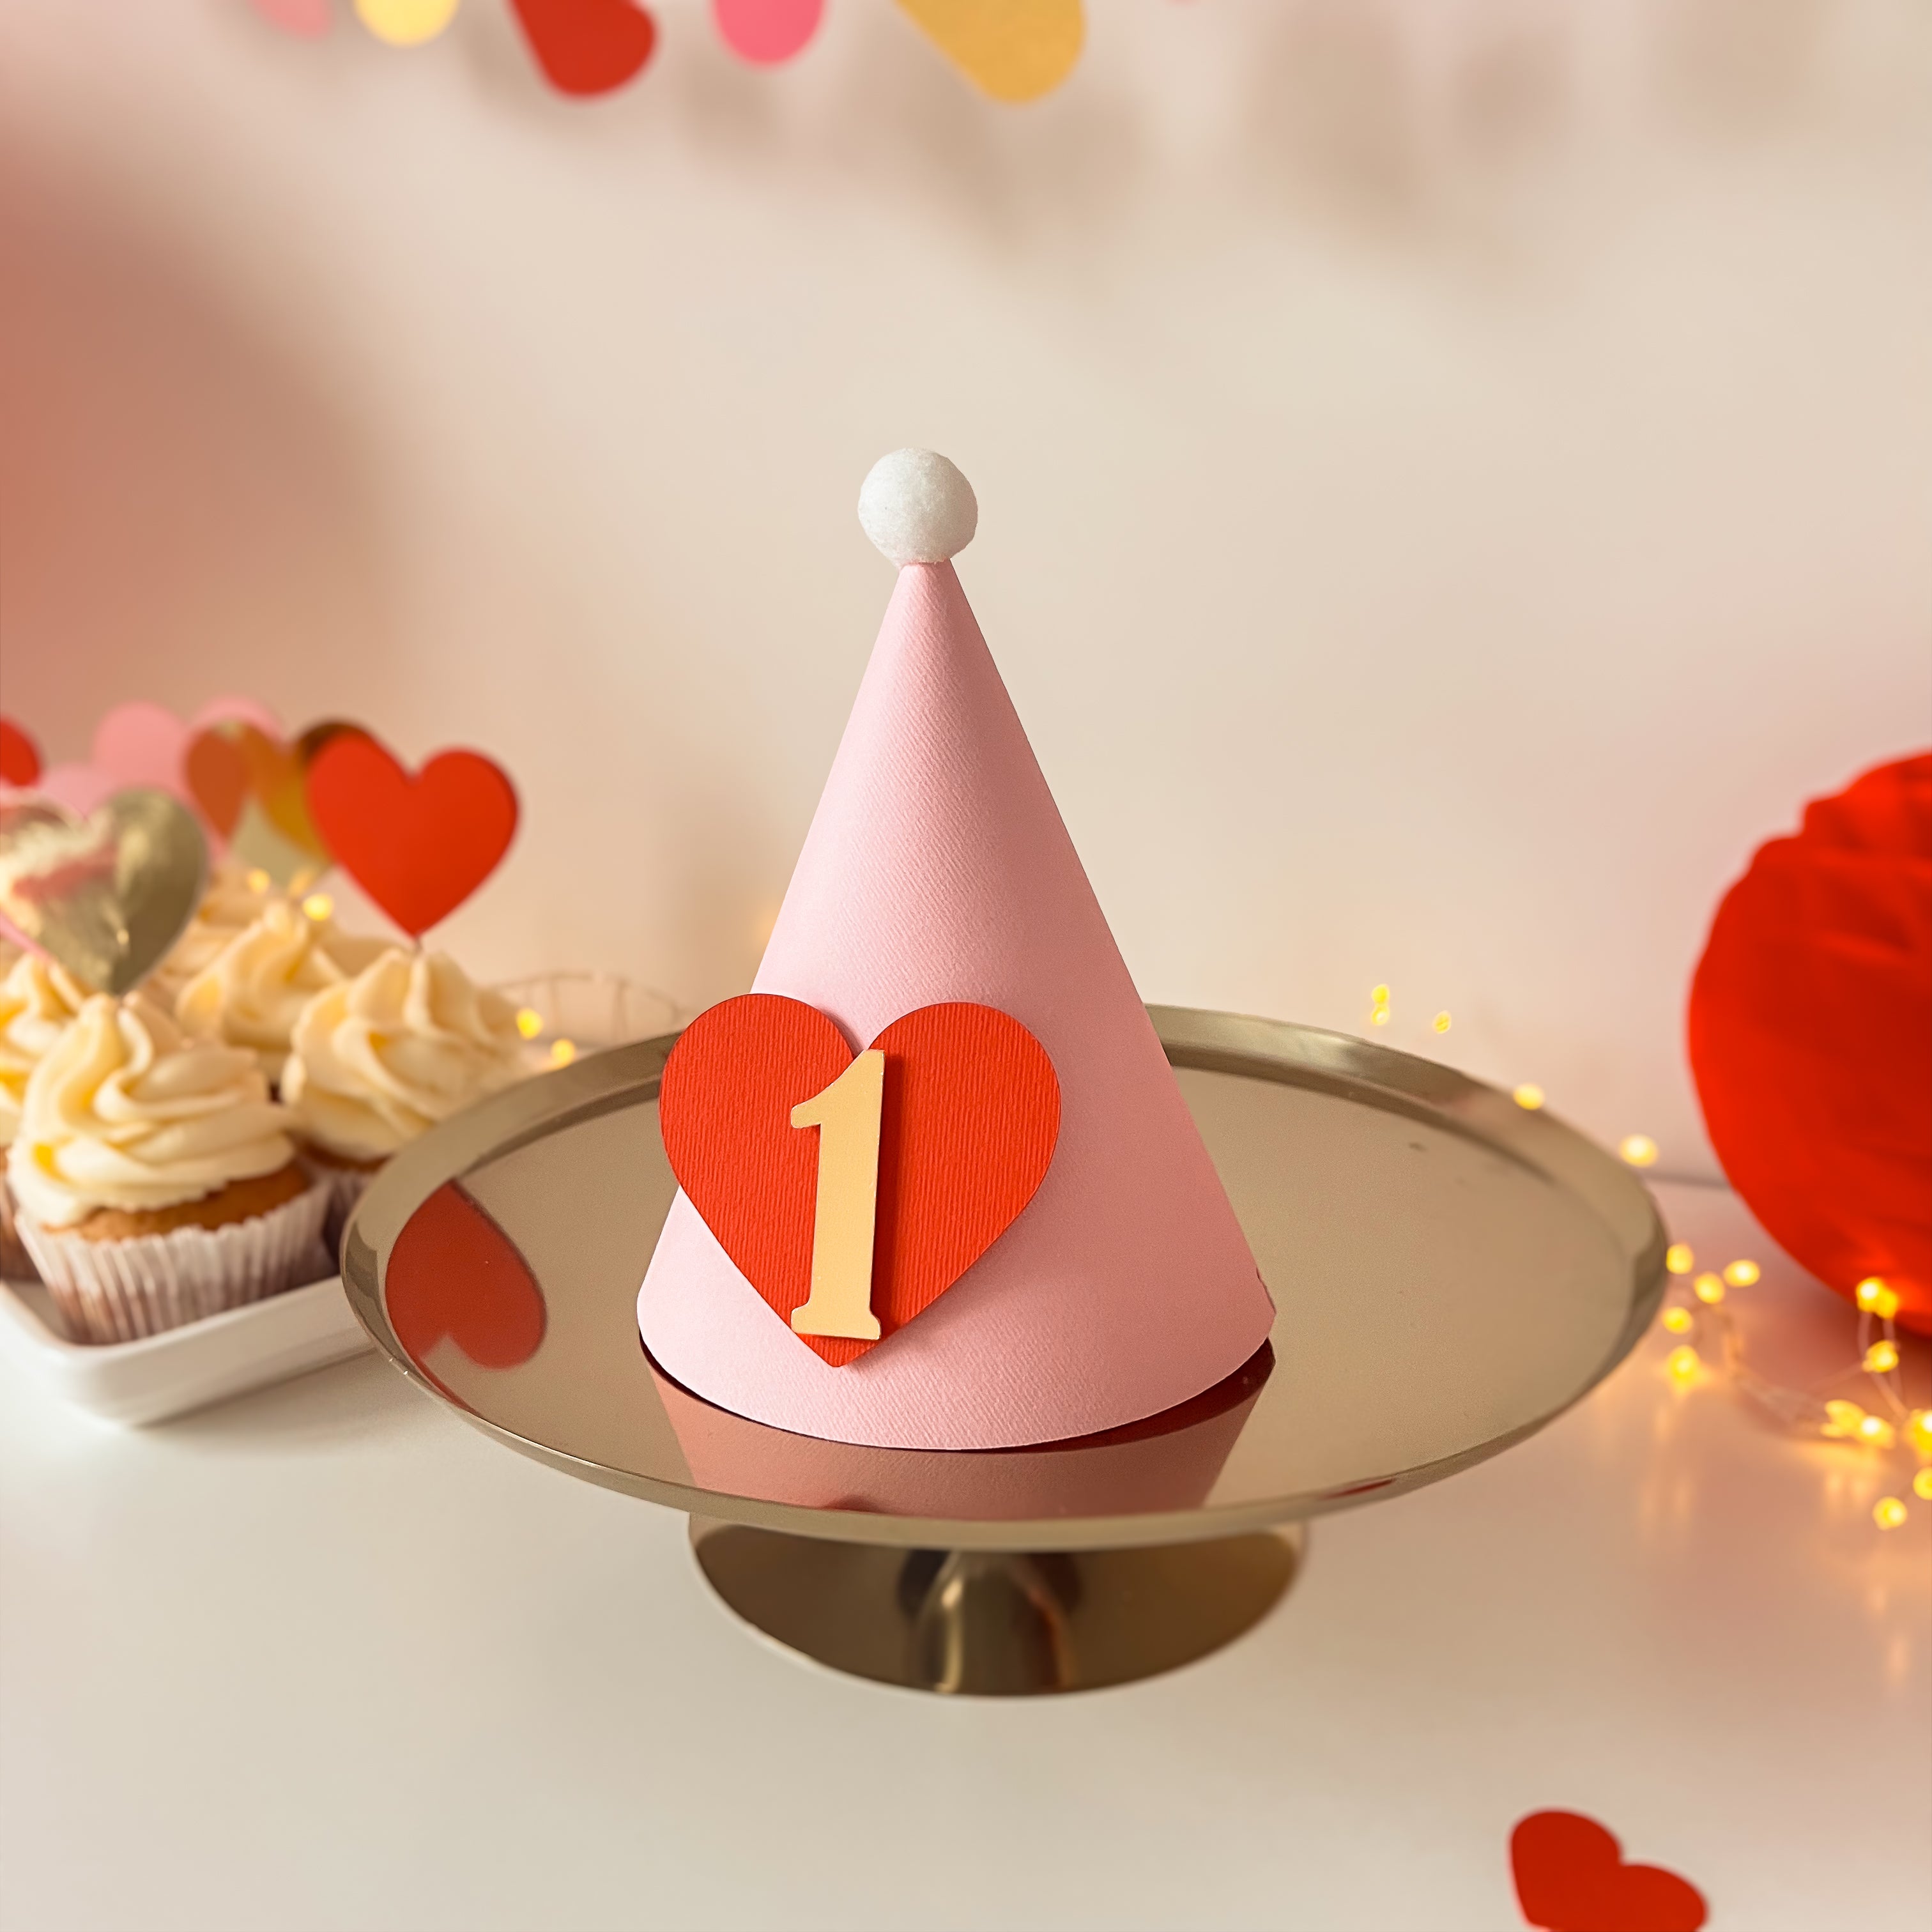 Valentines Birthday One Party Hat Valentine's Day 1st Birthday Decoration Our Little Sweetheart Birthday Cake Smash Outfit One Year Old Party